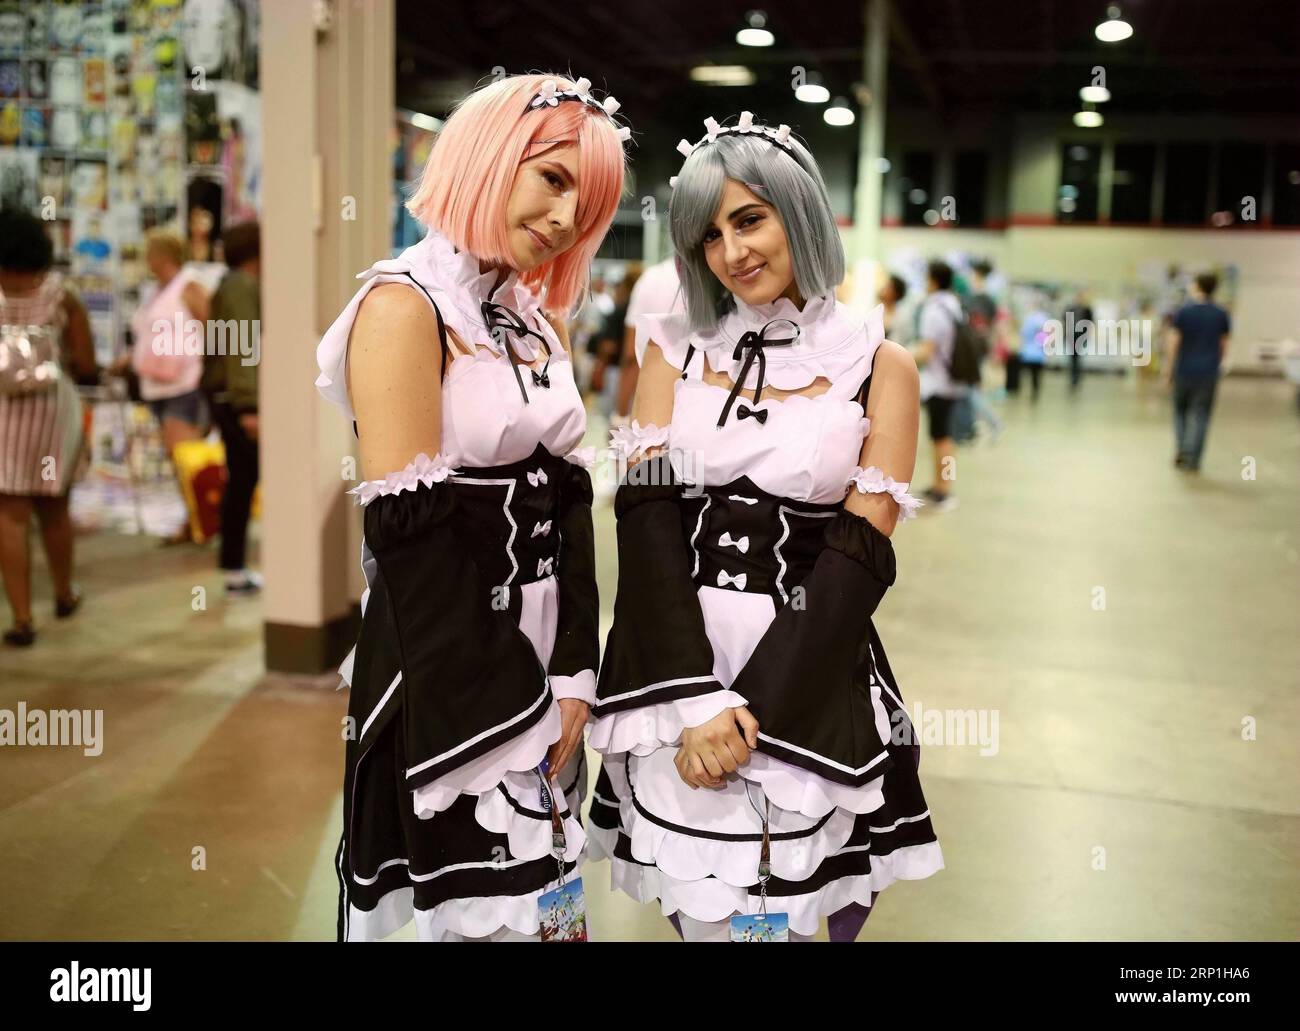 Anime Midwest | Things to do in Chicago